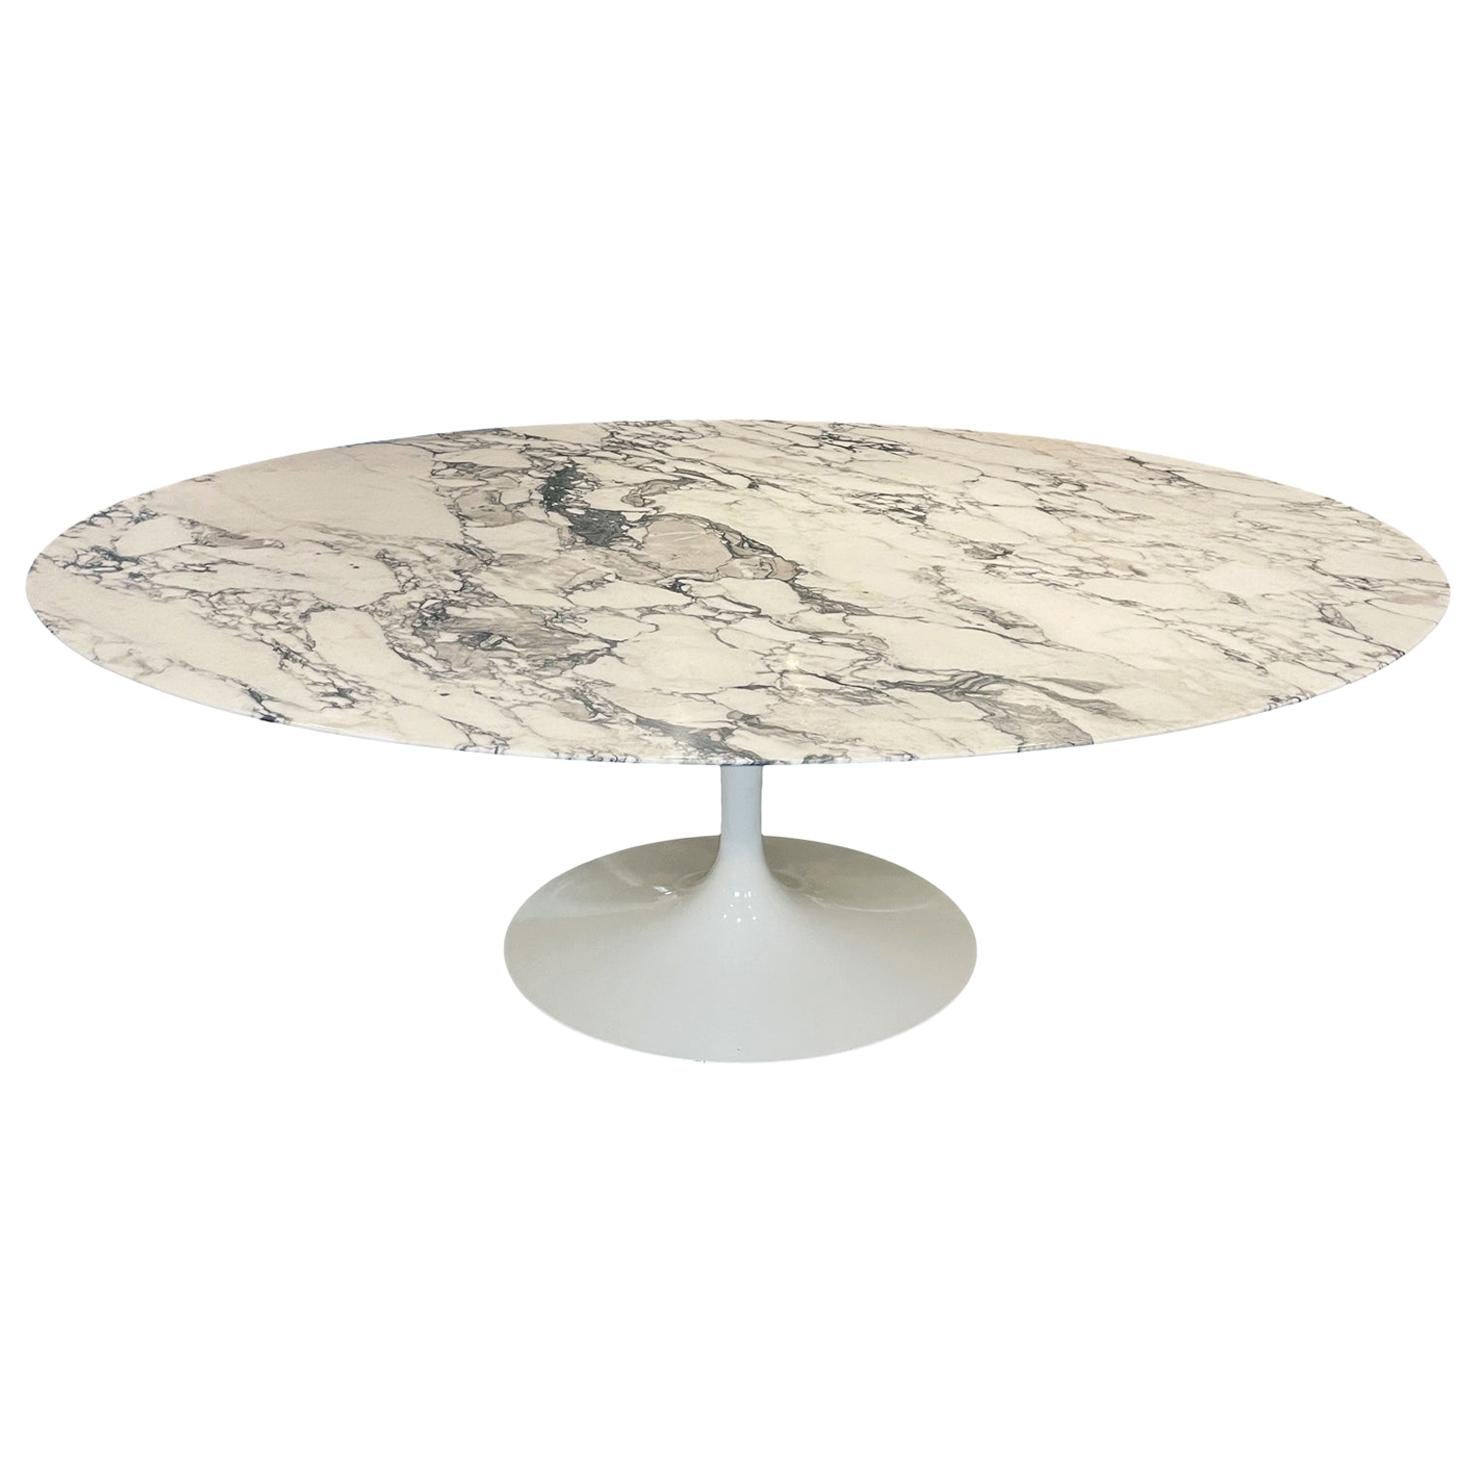 Mid-Century Modern Oval Dining Table by Eero Saarinen for Knoll in White Marble